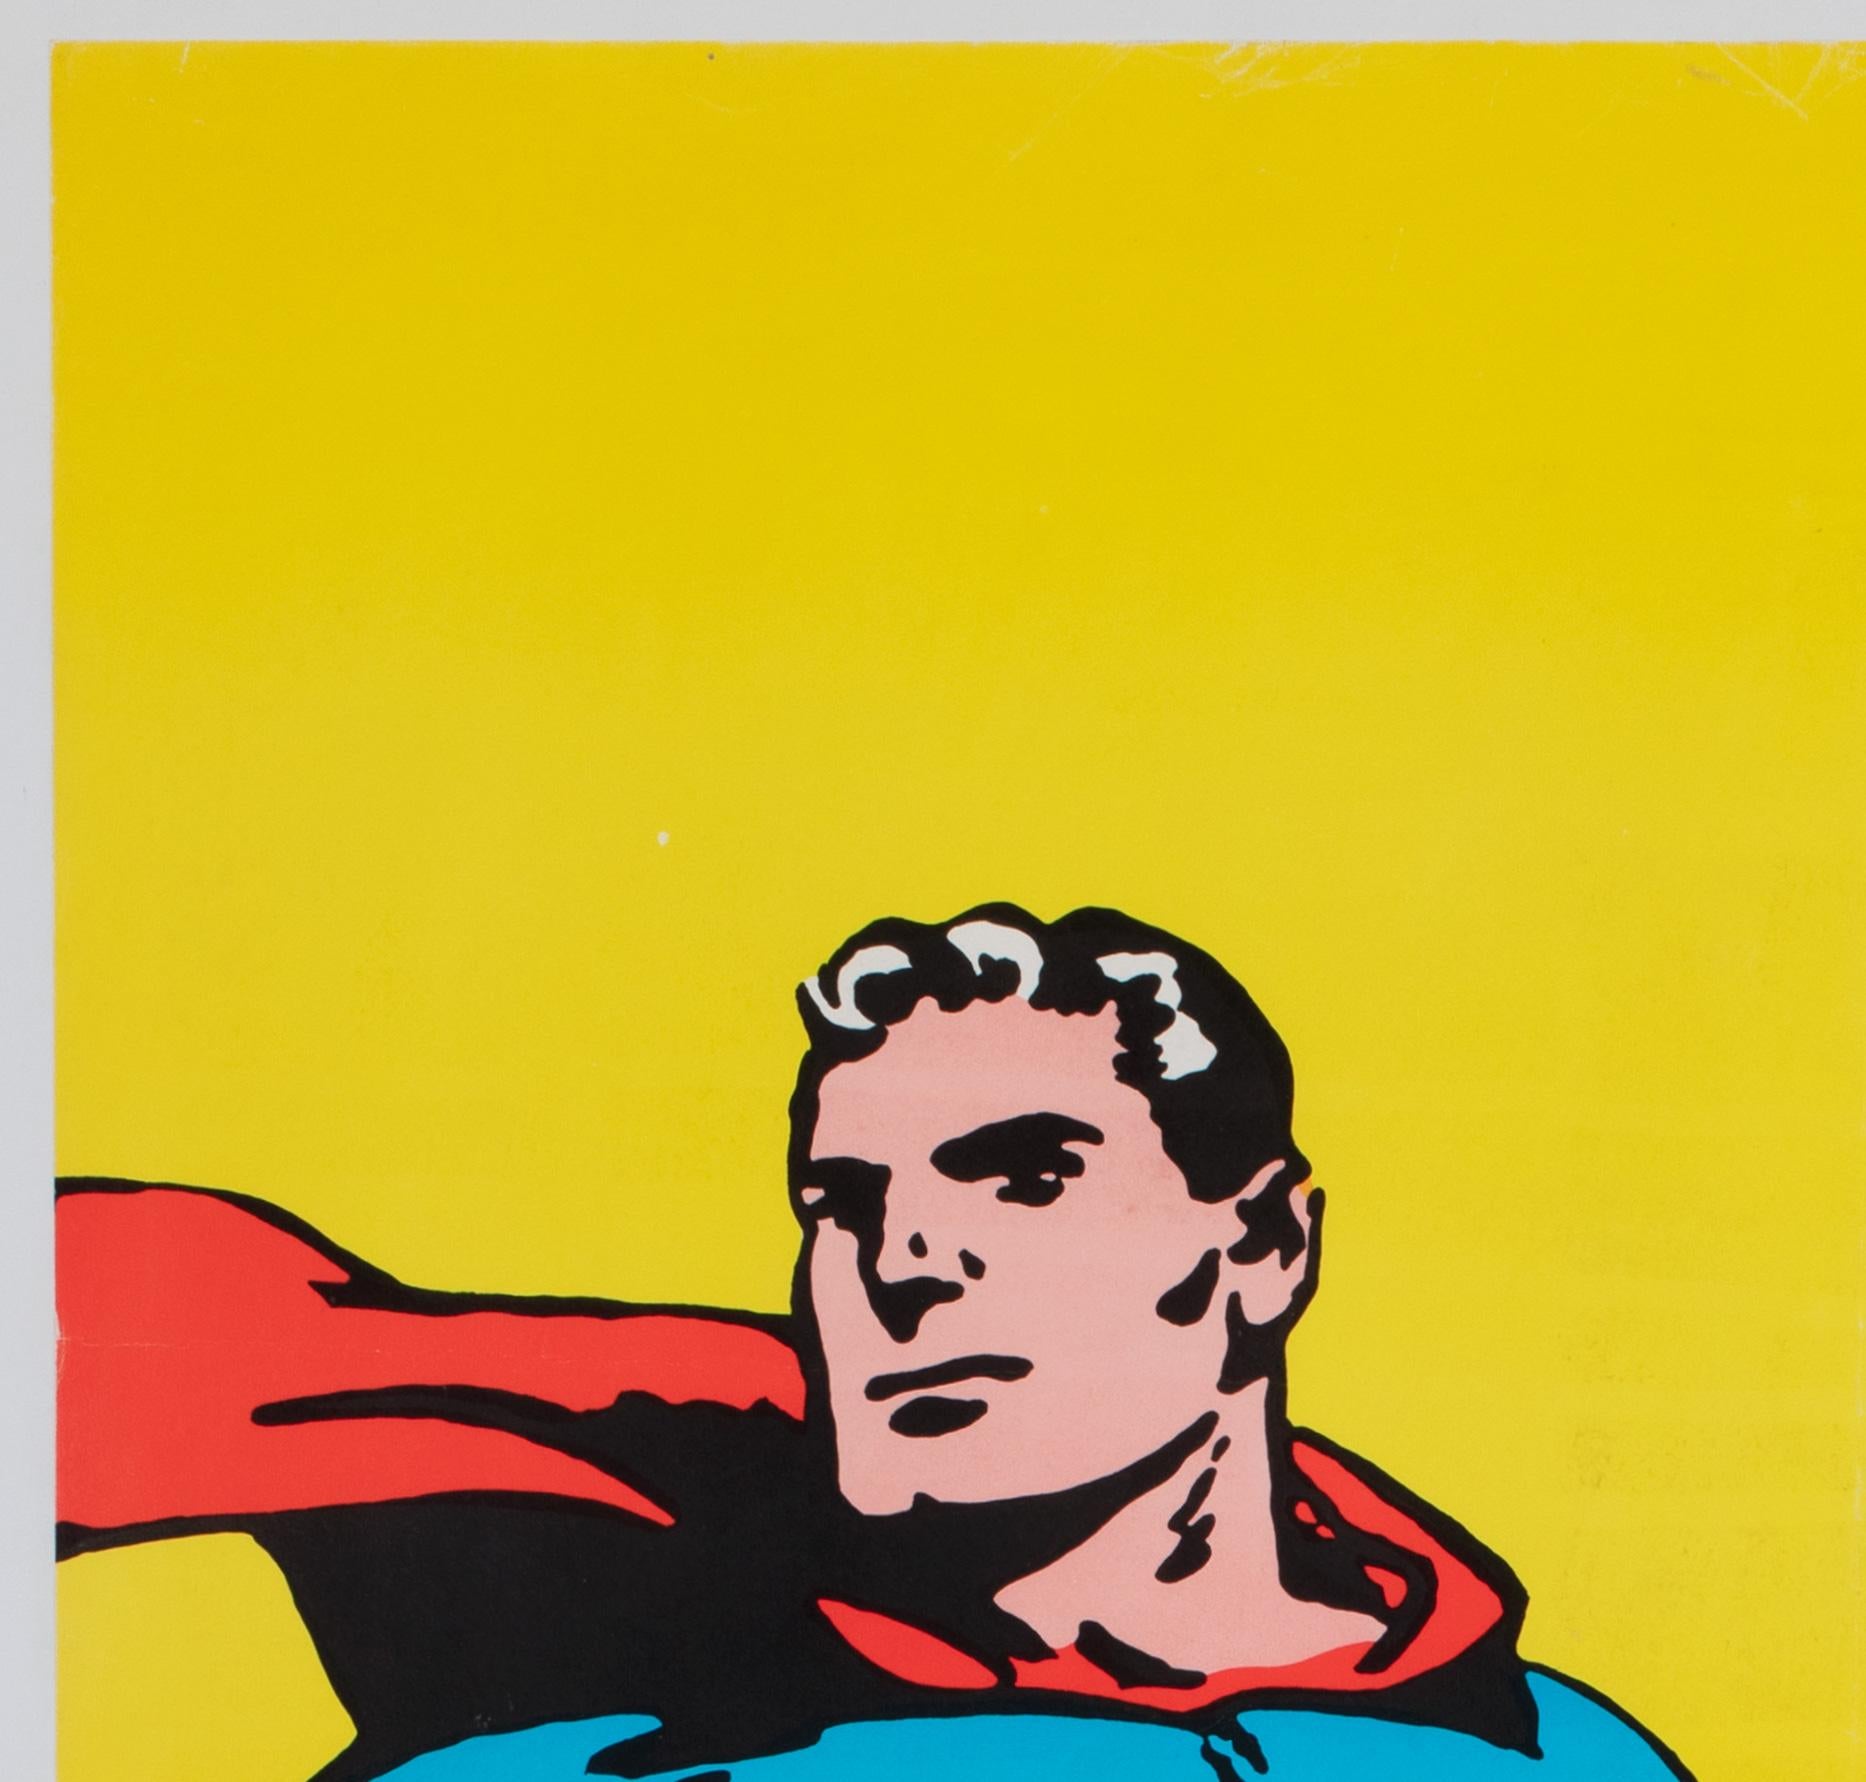 Argentine USSR CCCP USA Superman 1968 Opus Int Poster, Roman Cieslewicz For Sale